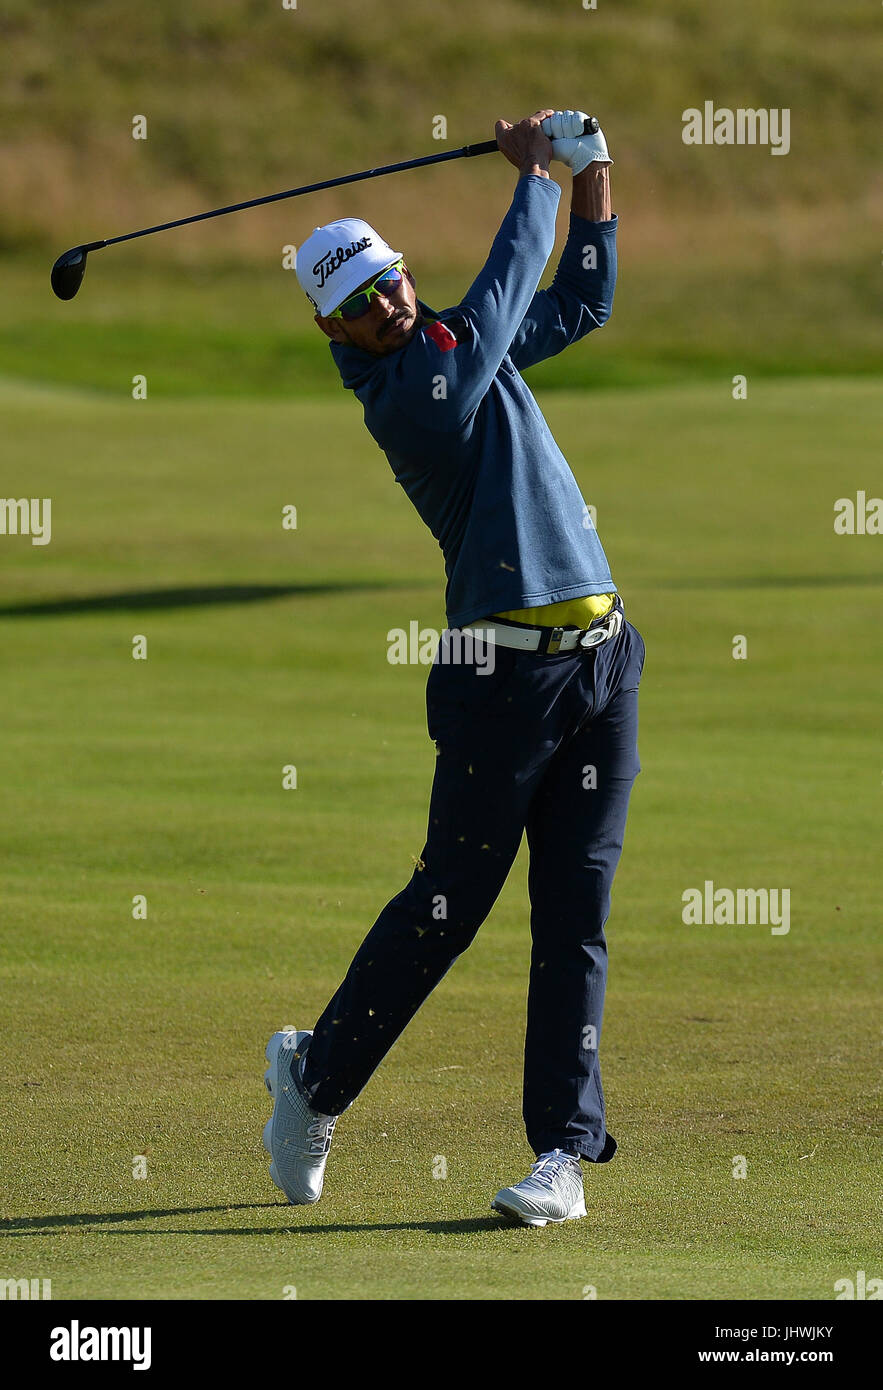 Spain's Rafa Cabrera Bello, winner of the Aberdeen Asset Management Scottish Open, plays his second shot to the 17th during day four of the 2017 Aberdeen Asset Management Scottish Open at Dundonald Links, Troon. PRESS ASSOCIATION Photo. Picture date: Sunday July 16, 2017. See PA story GOLF Scottish. Photo credit should read: Mark Runnacles/PA Wire. Stock Photo